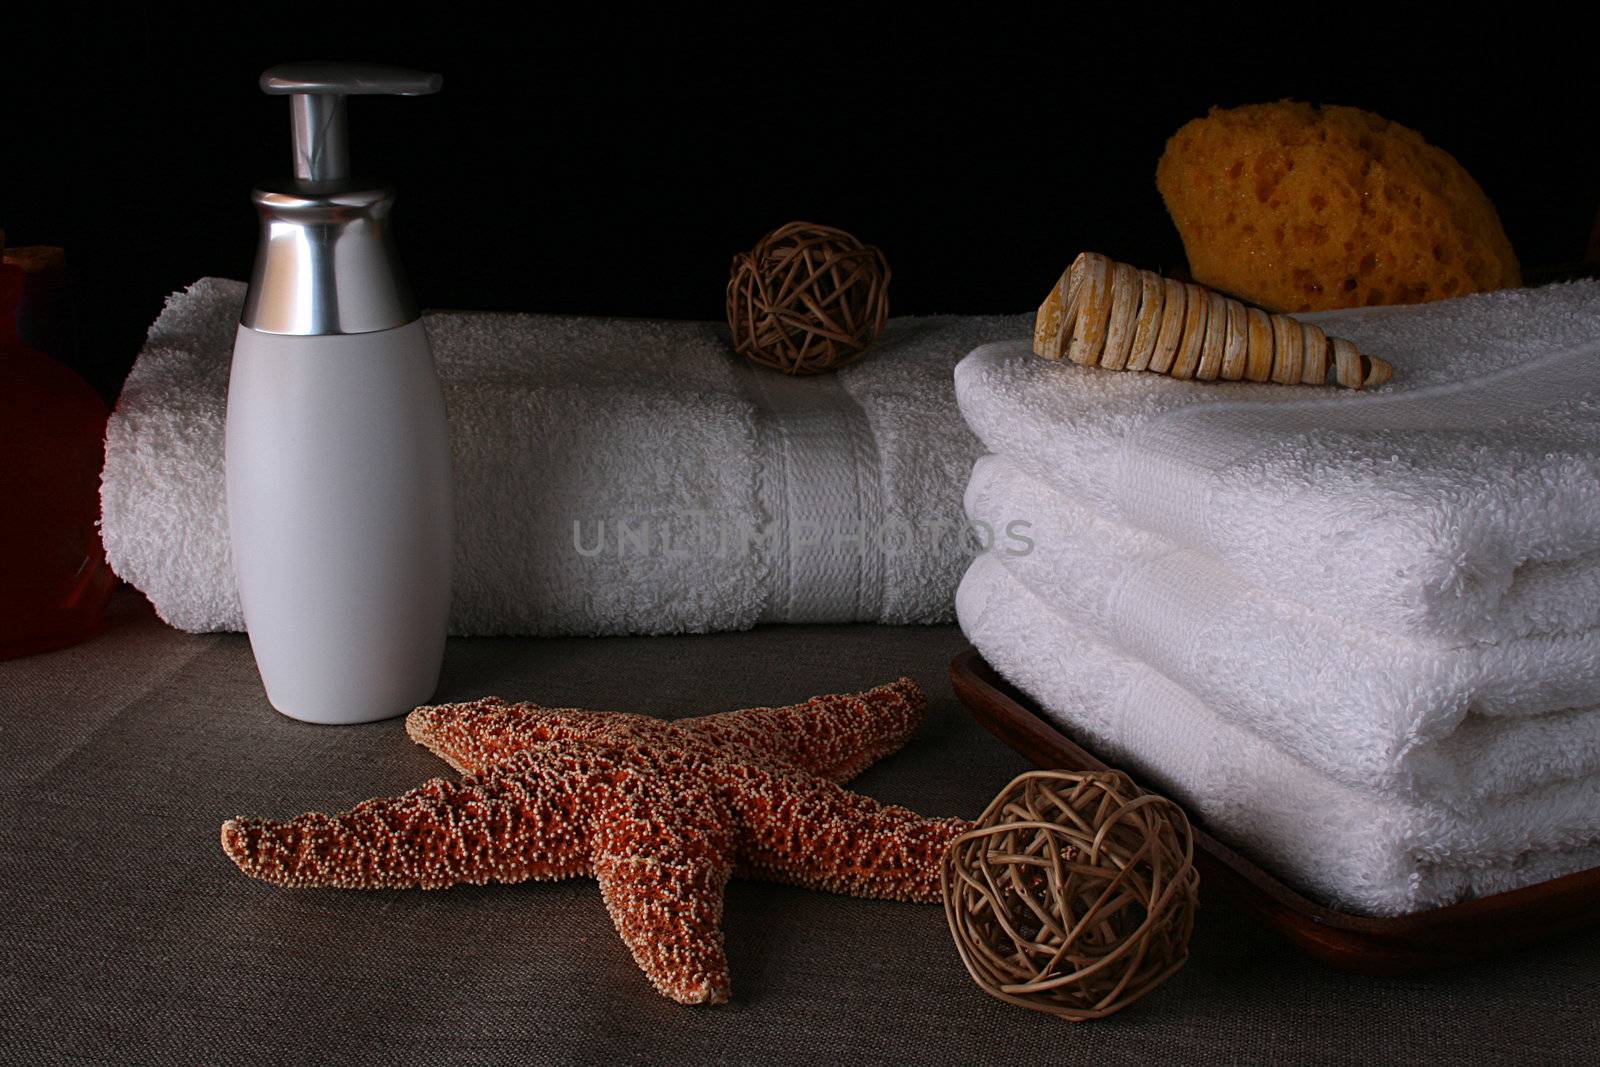 Subjects of personal hygiene: towels, liquid soap and a bast on a dense fabric with decorative elements: a starfish and an aromatic wood.